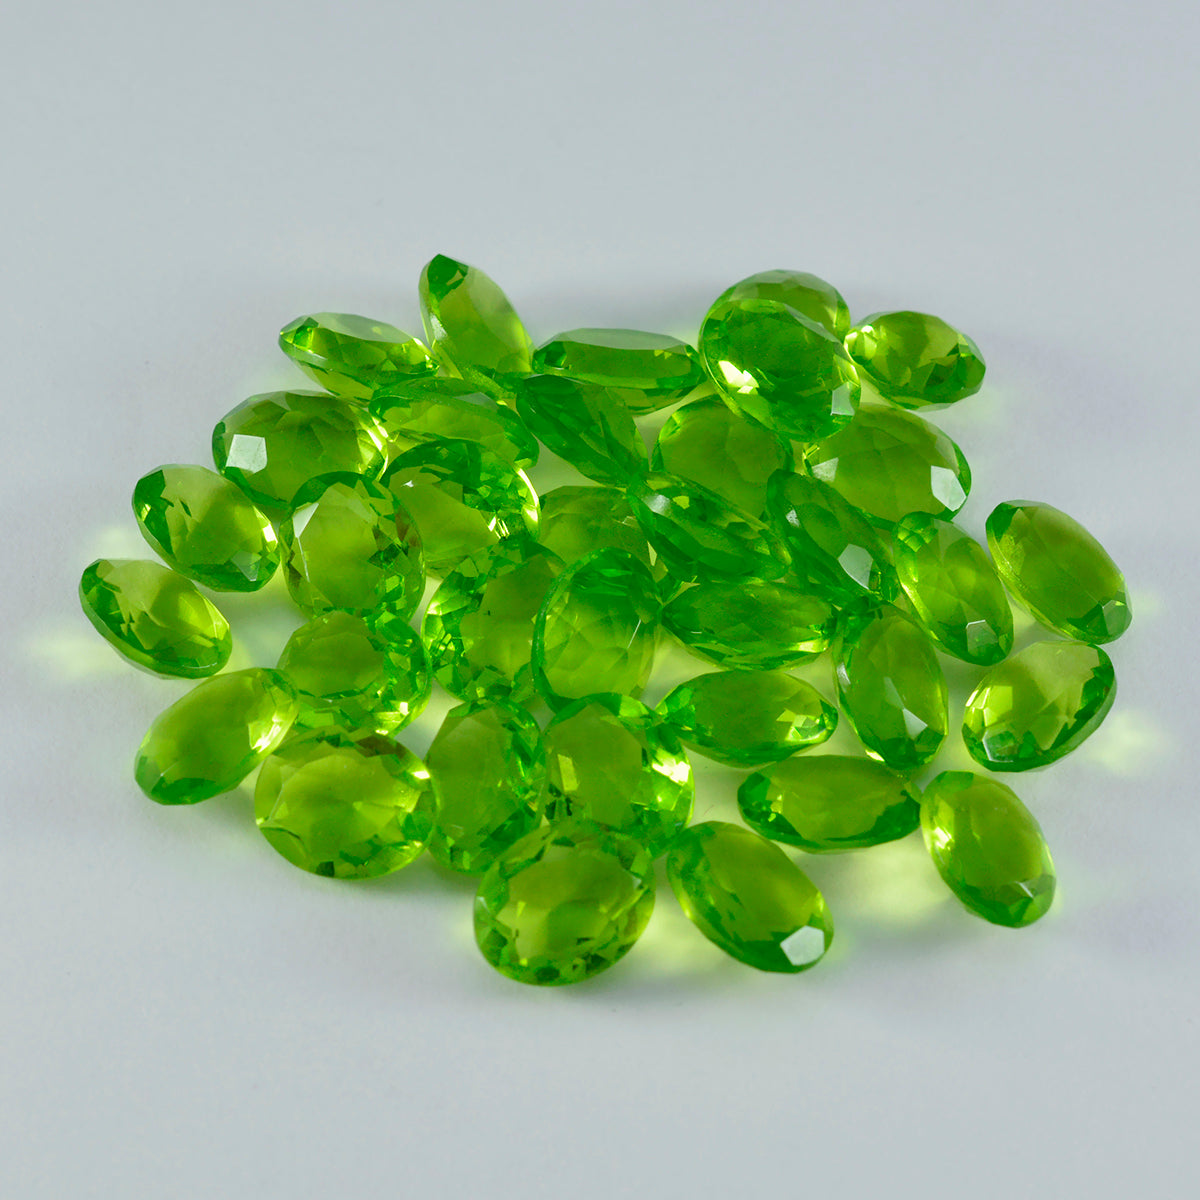 Riyogems 1PC Green Peridot CZ Faceted 6x8 mm Oval Shape good-looking Quality Loose Stone